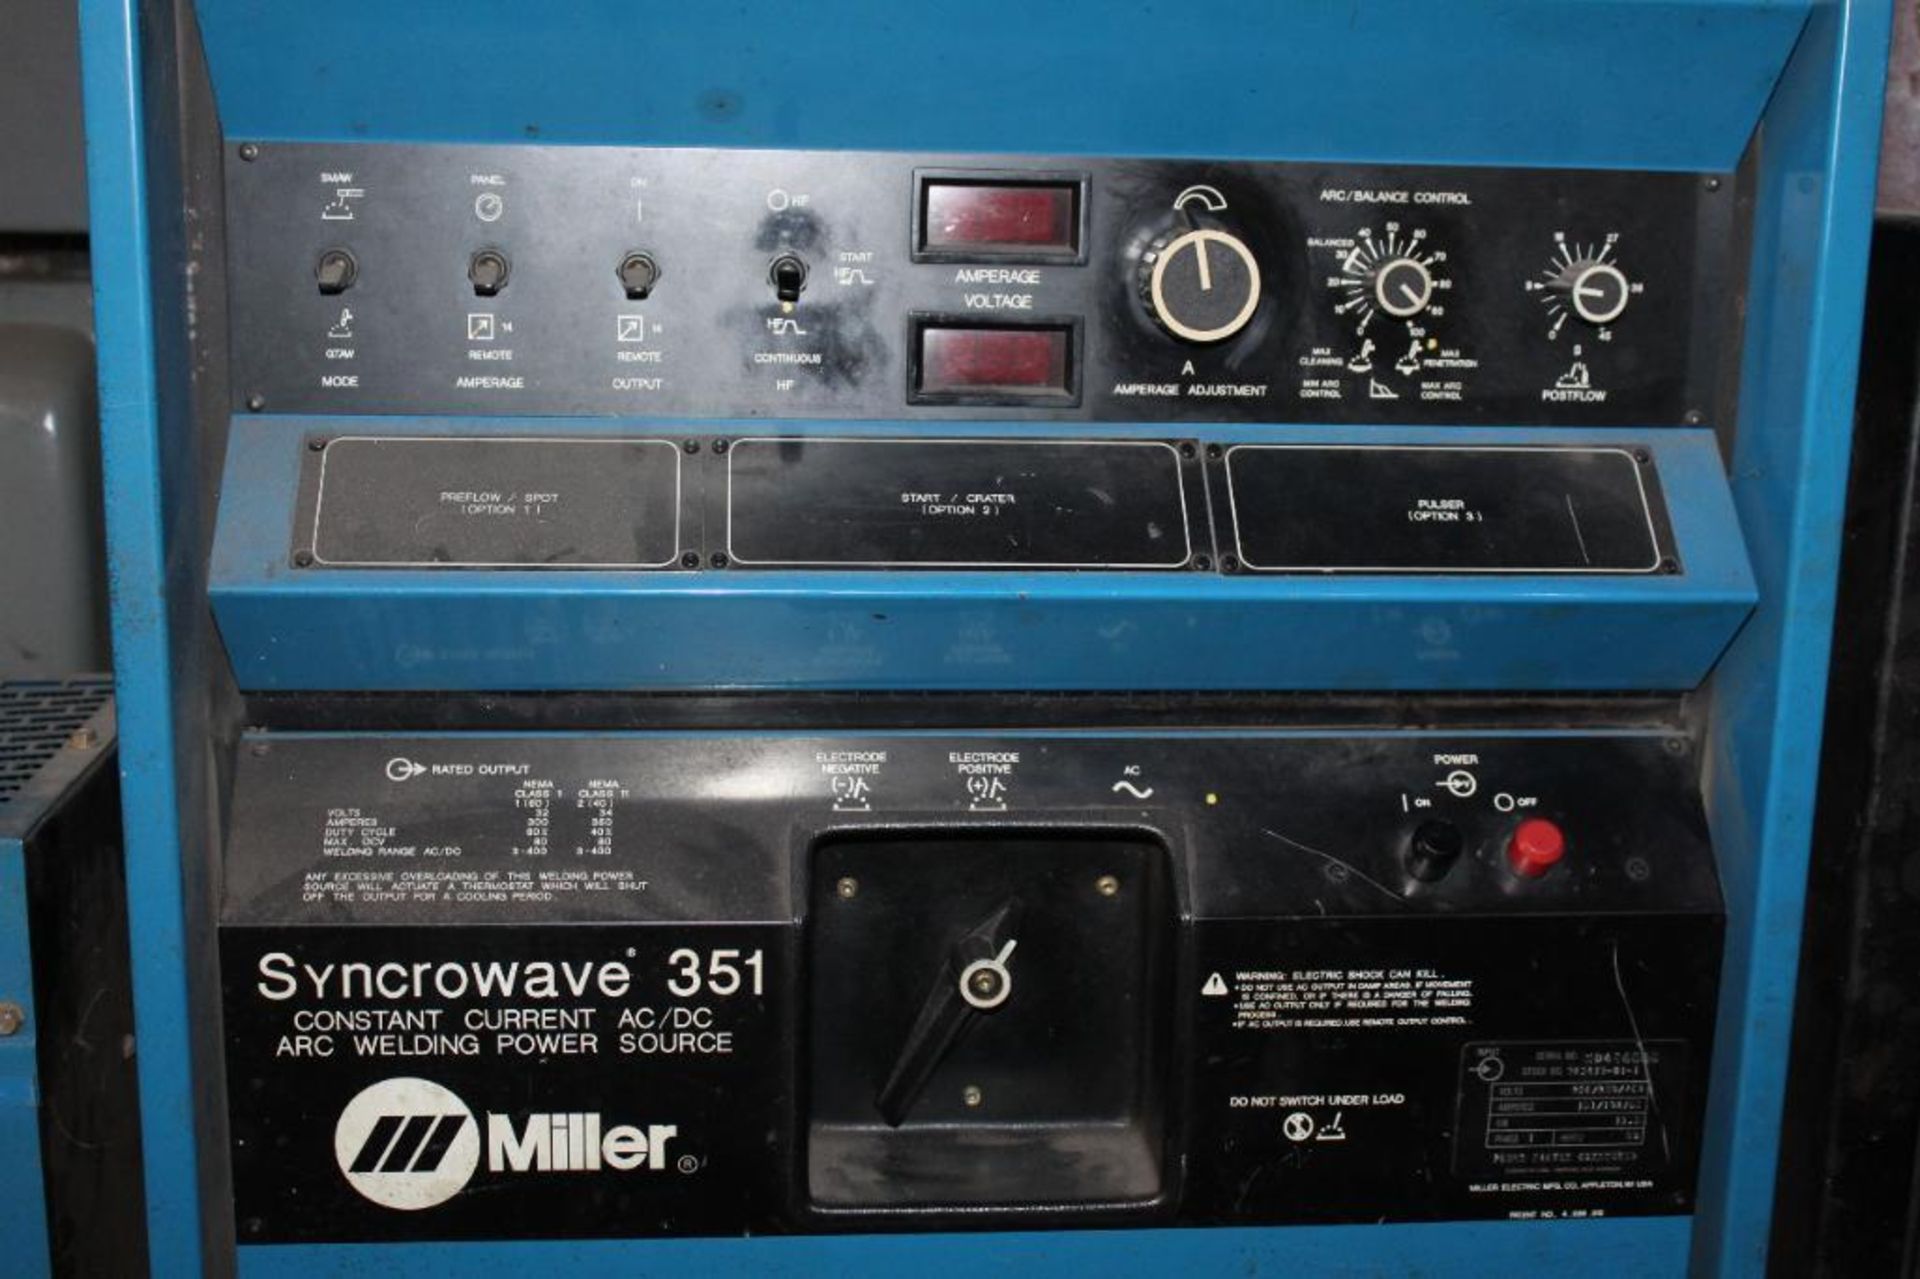 Miller Syncrowave 351 Constant Current AC/DC Arc Welding Power Source W/ Miller Watermate 1A Cooling - Image 4 of 12